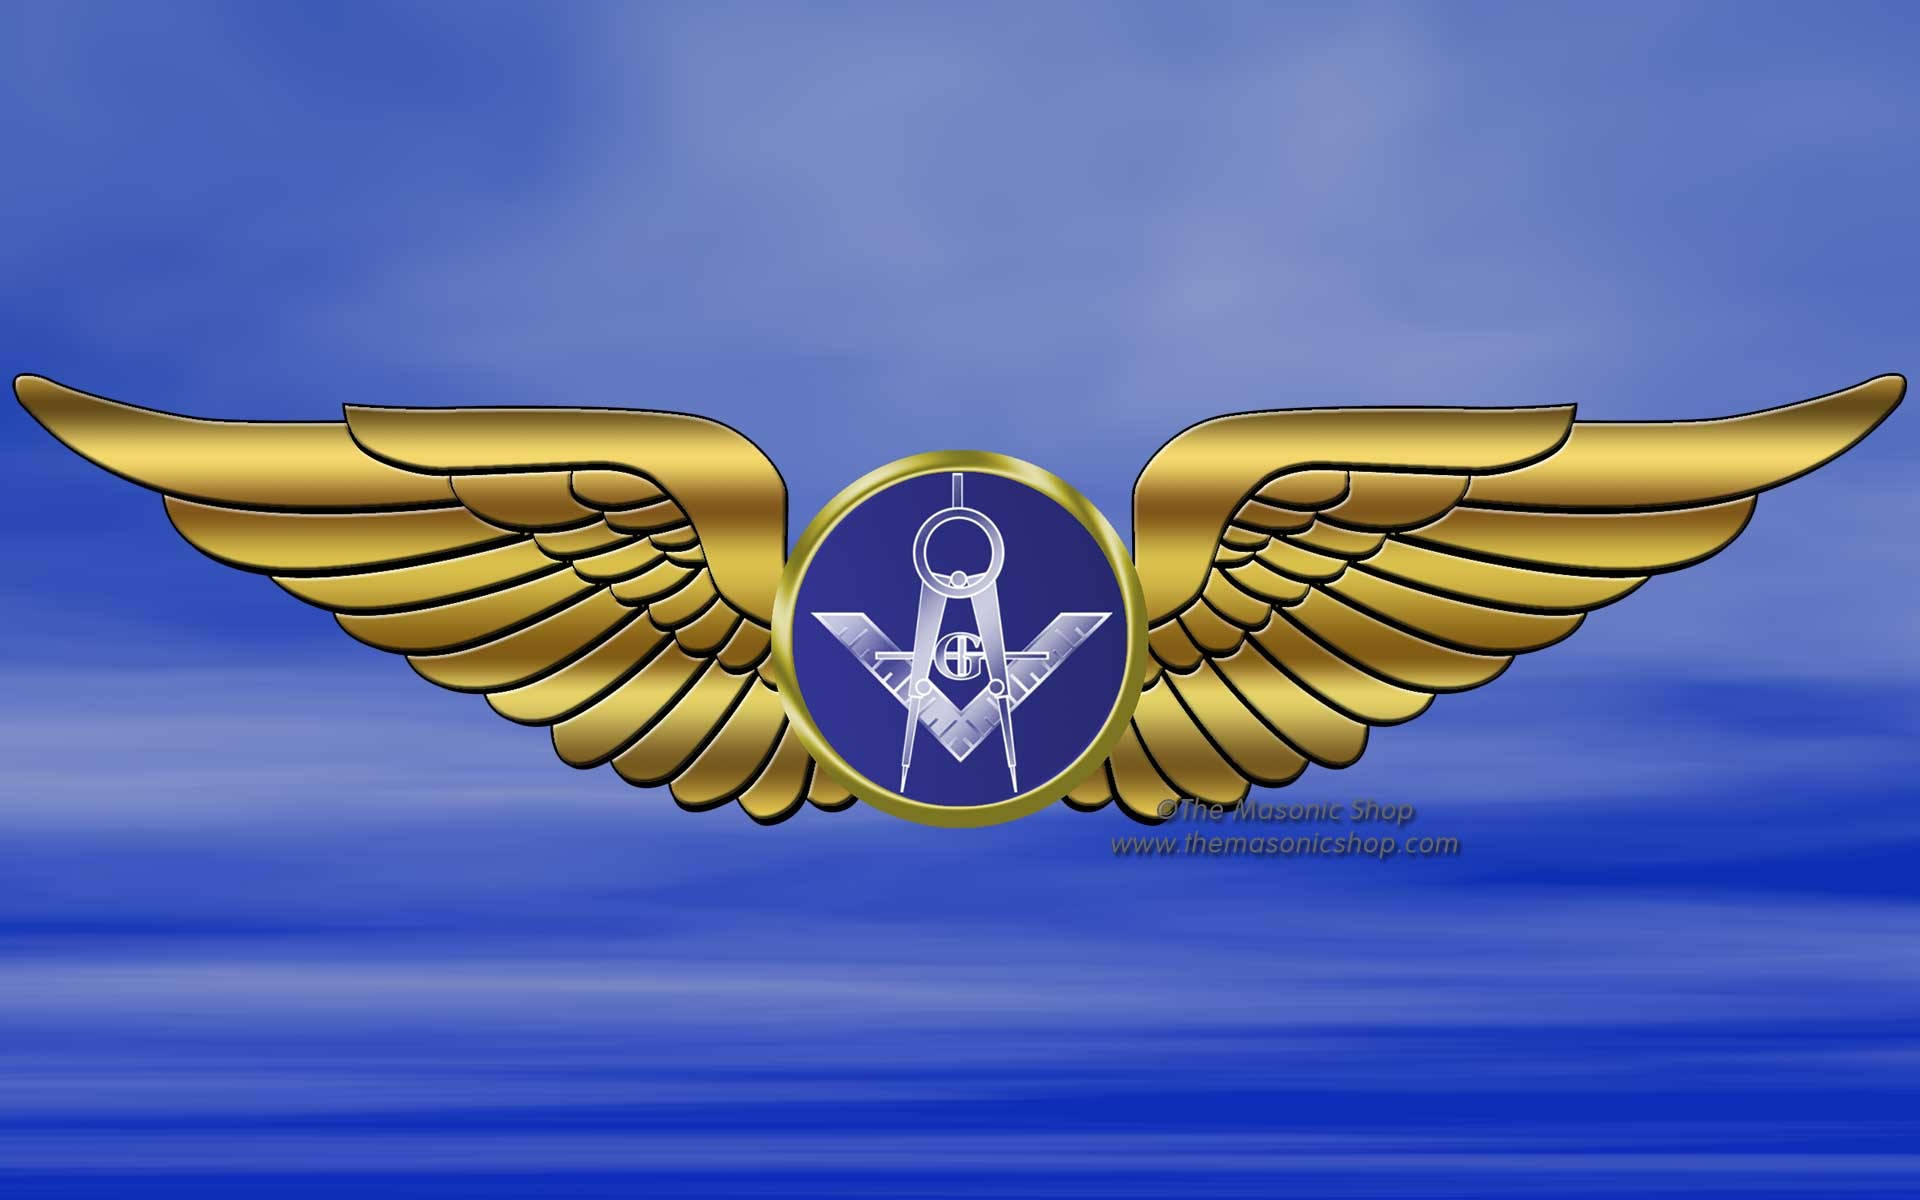 Masonic Logo With Golden Wings